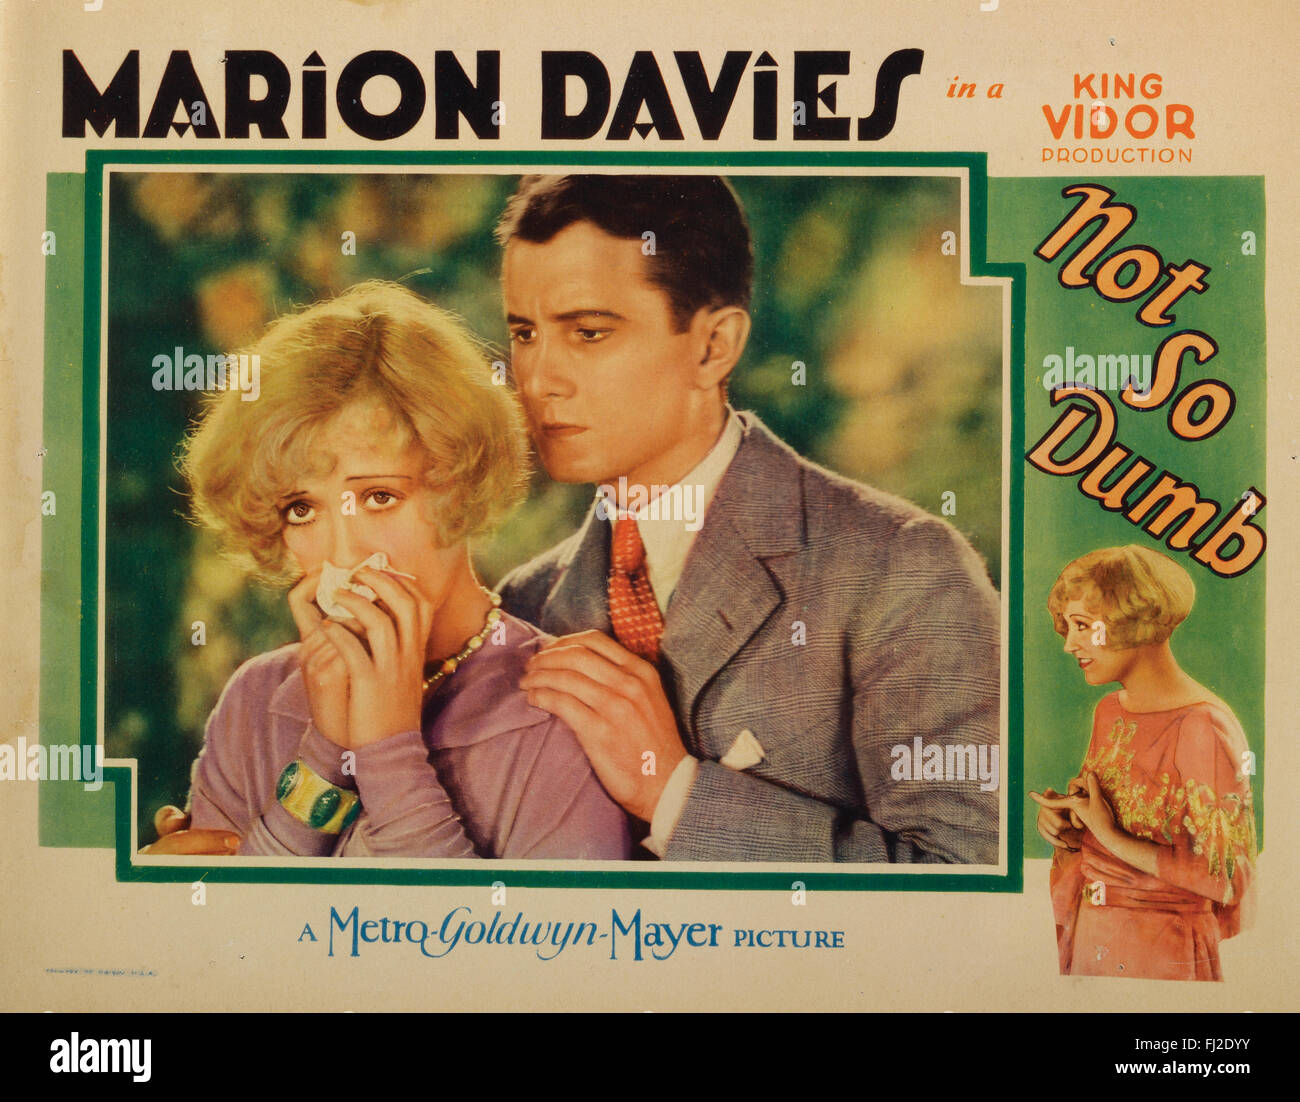 'Not So Dumb', (MGM, 1930), scene lobby card. Starring: Marion Davies, Elliott Nugent, Raymond Hackett, William Holden. Director: King Vidor; Writers: George S. Kaufman and Mark Connelly. Stock Photo